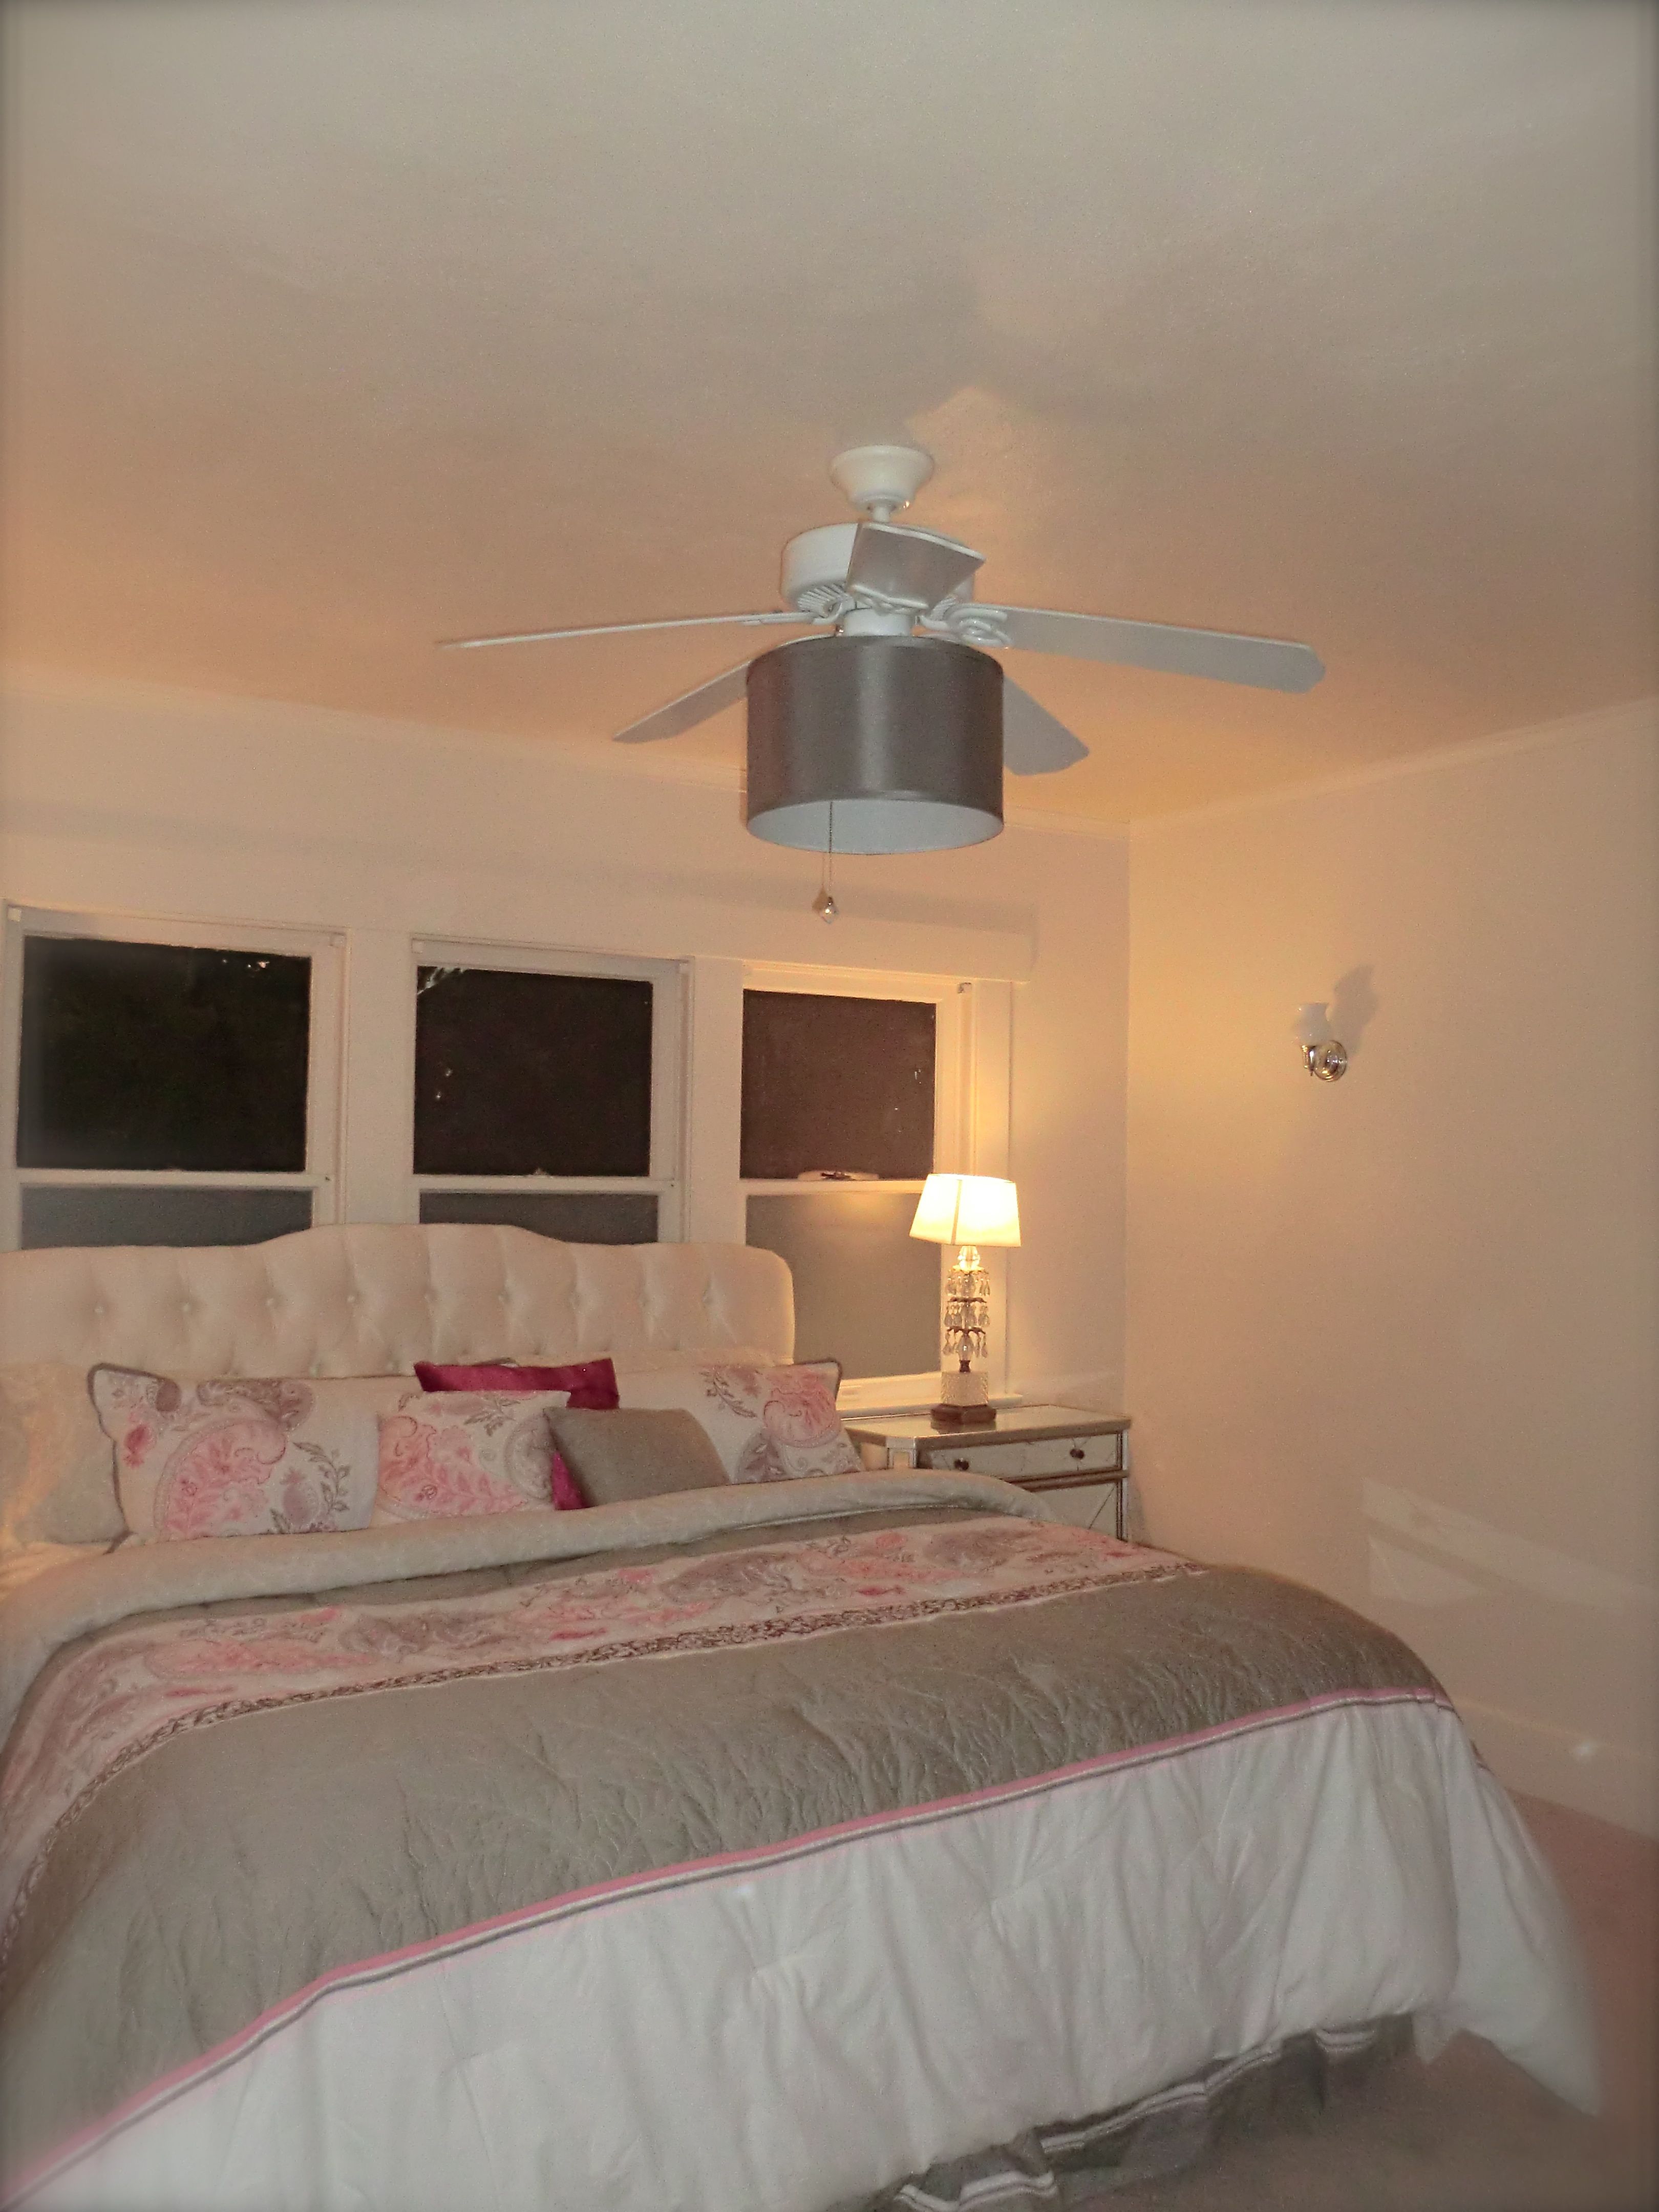 Simply Thrifting Super Simple Ceiling Fan Drum Shade